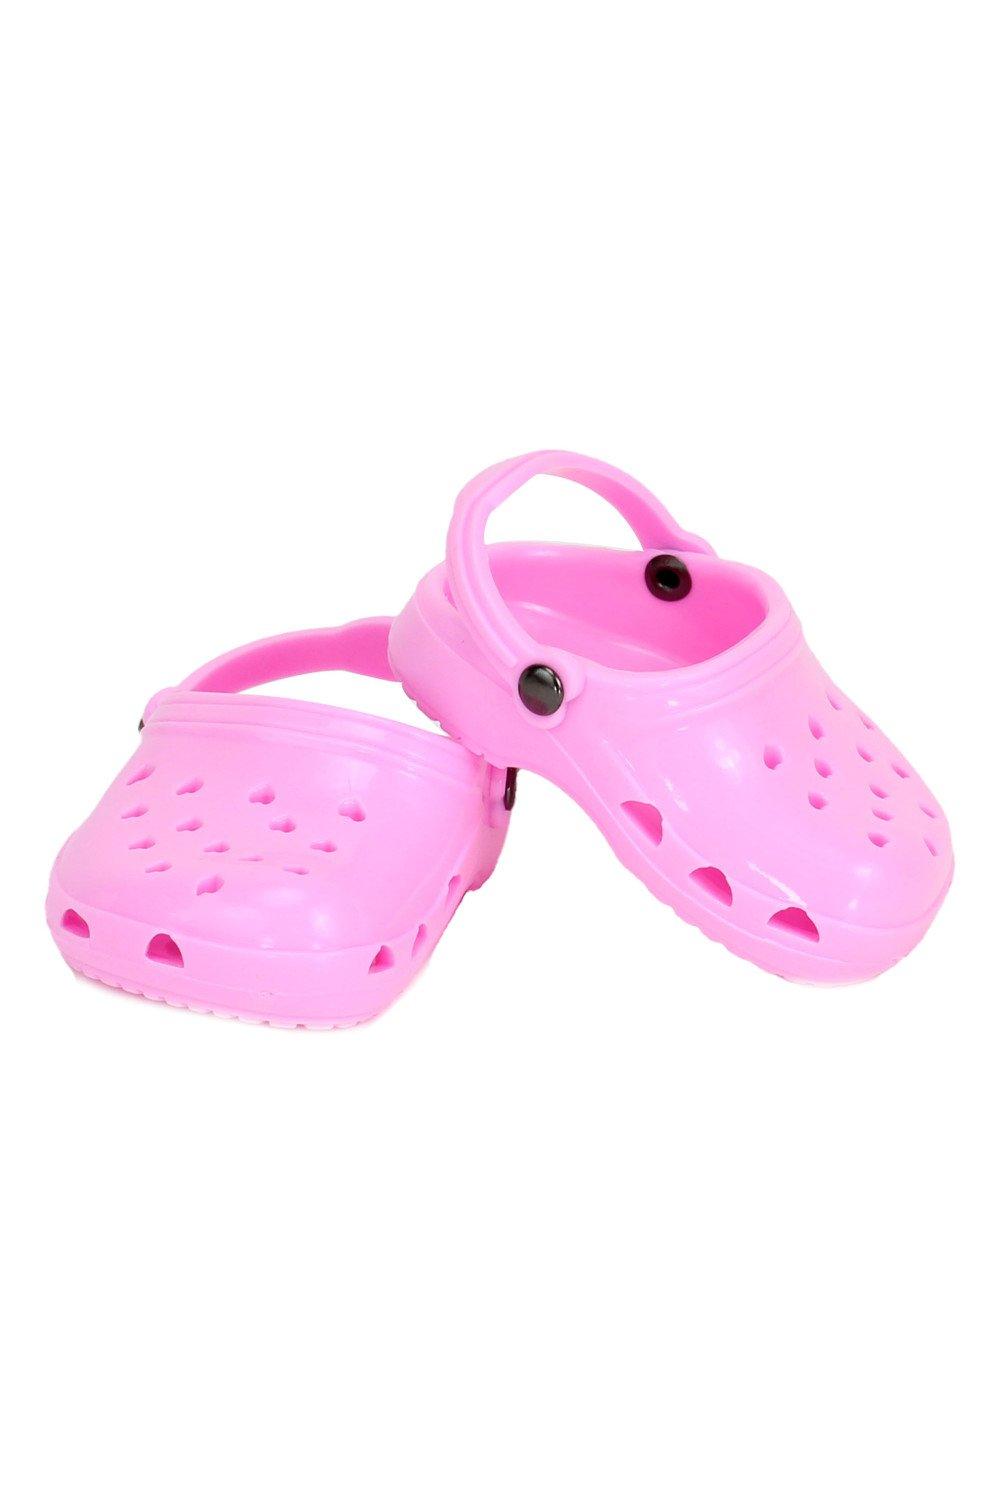 Sophia’s 18" Baby Doll Clog Sandals, Pink Shoes for Dolls